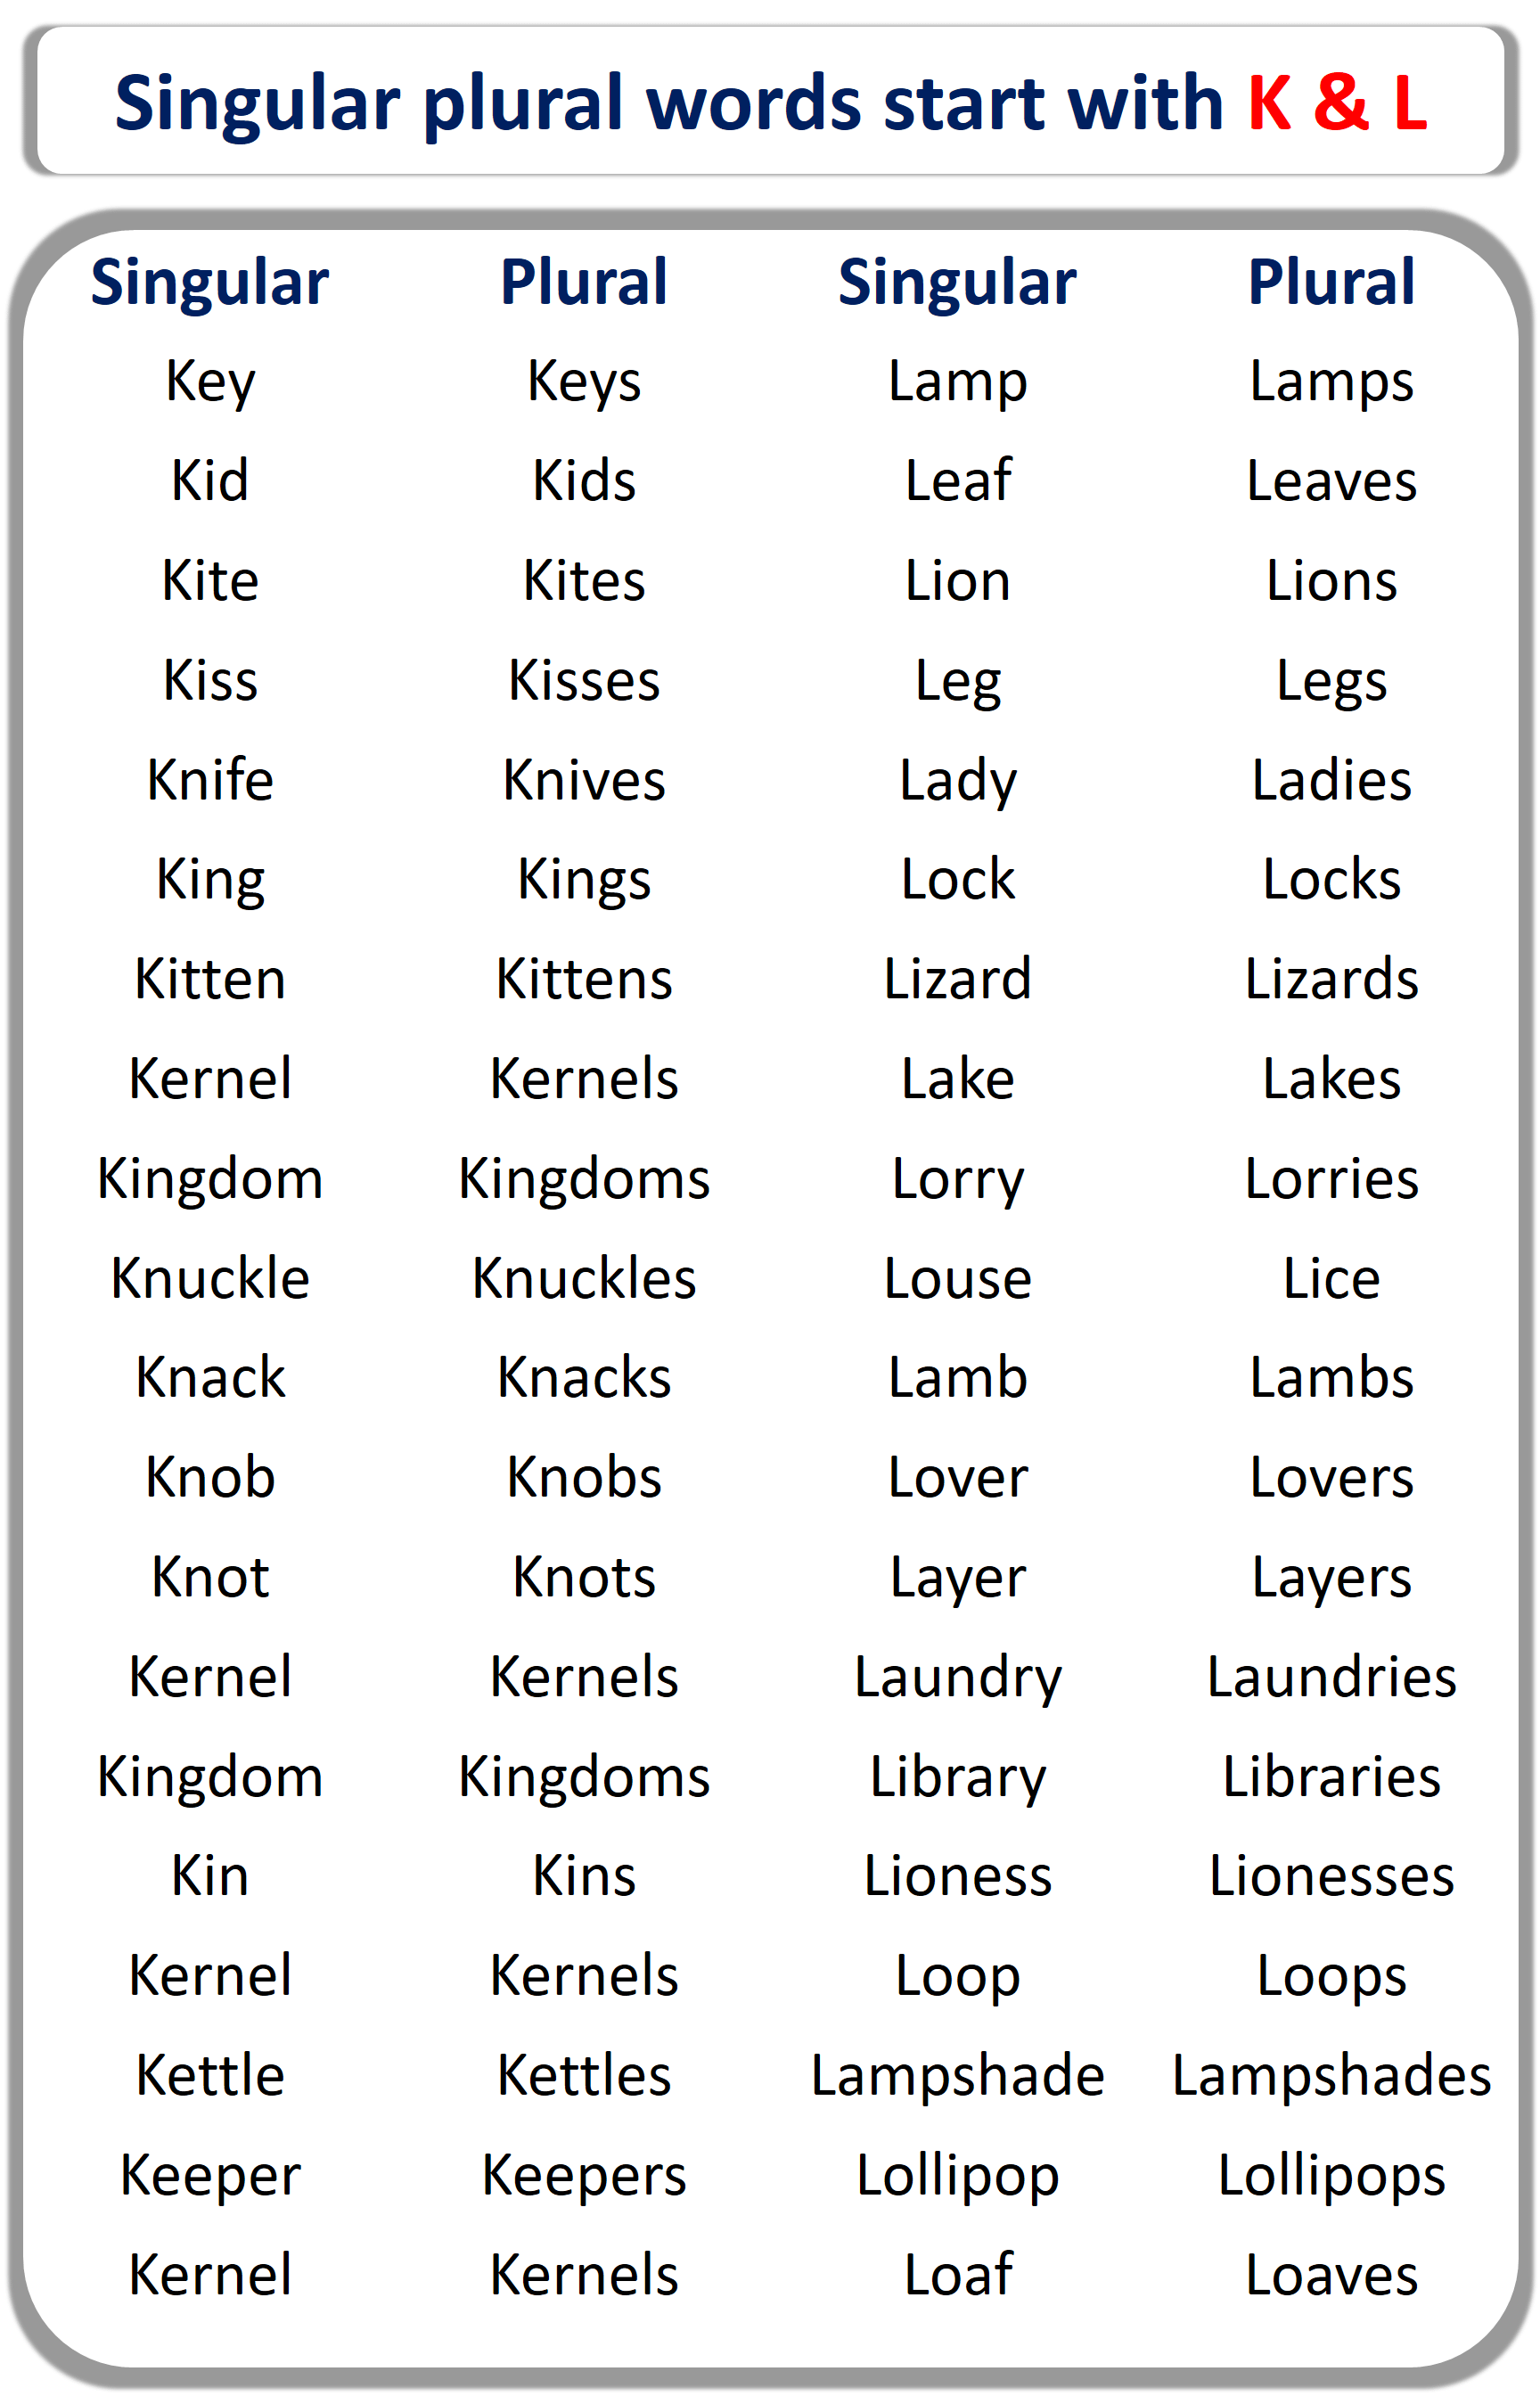 Singular Plural Words List From A to Z | K & L